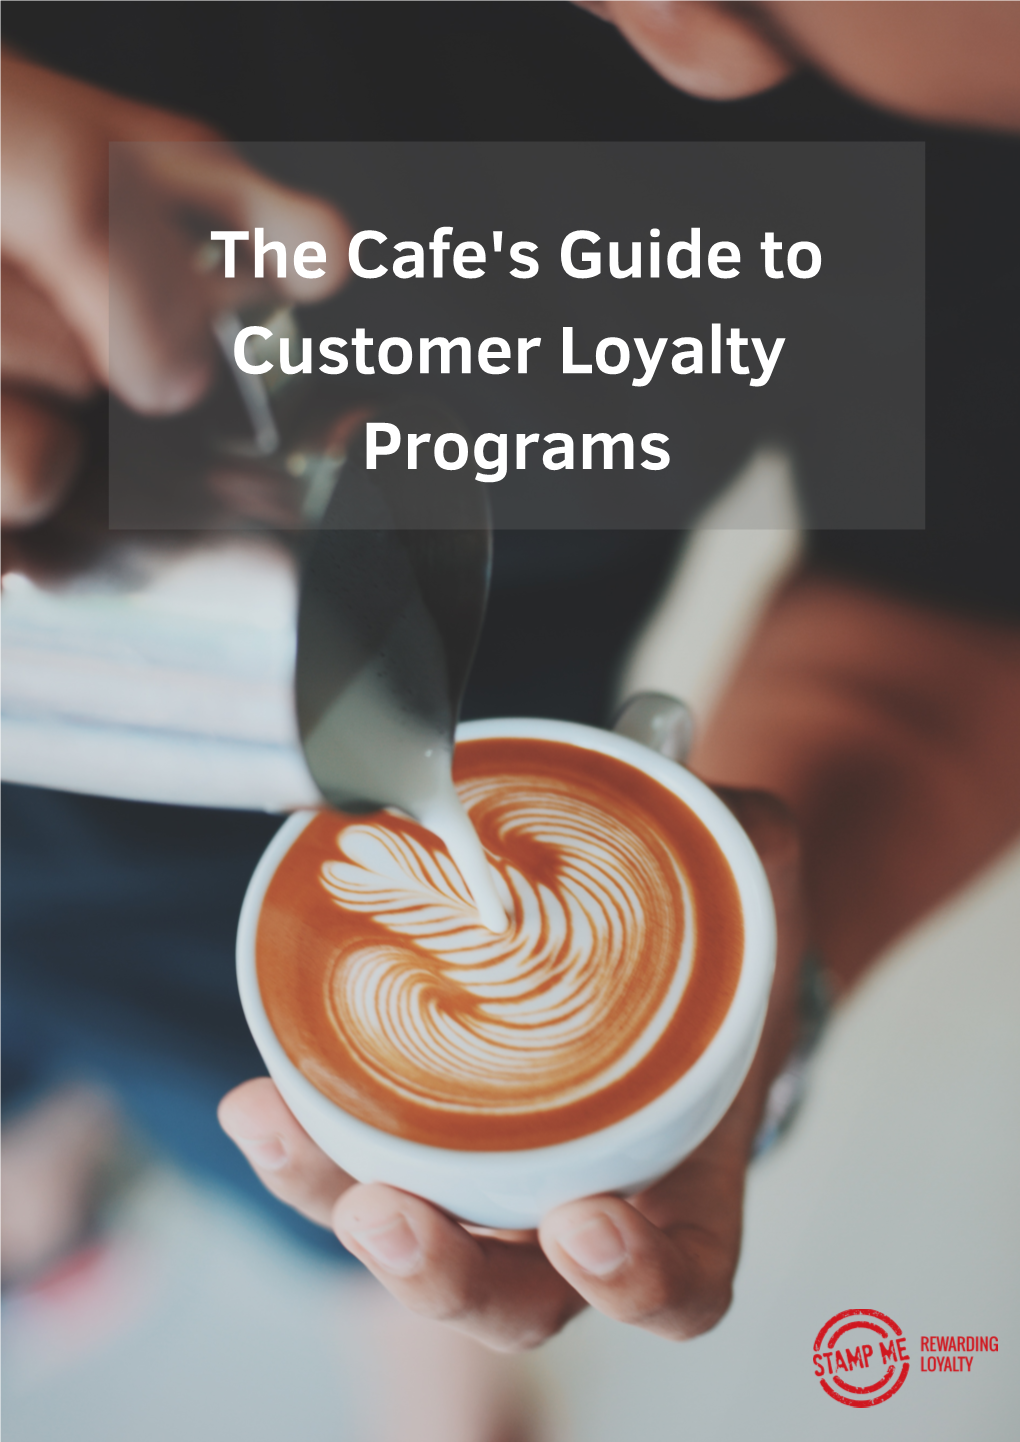 The Cafe's Guide to Customer Loyalty